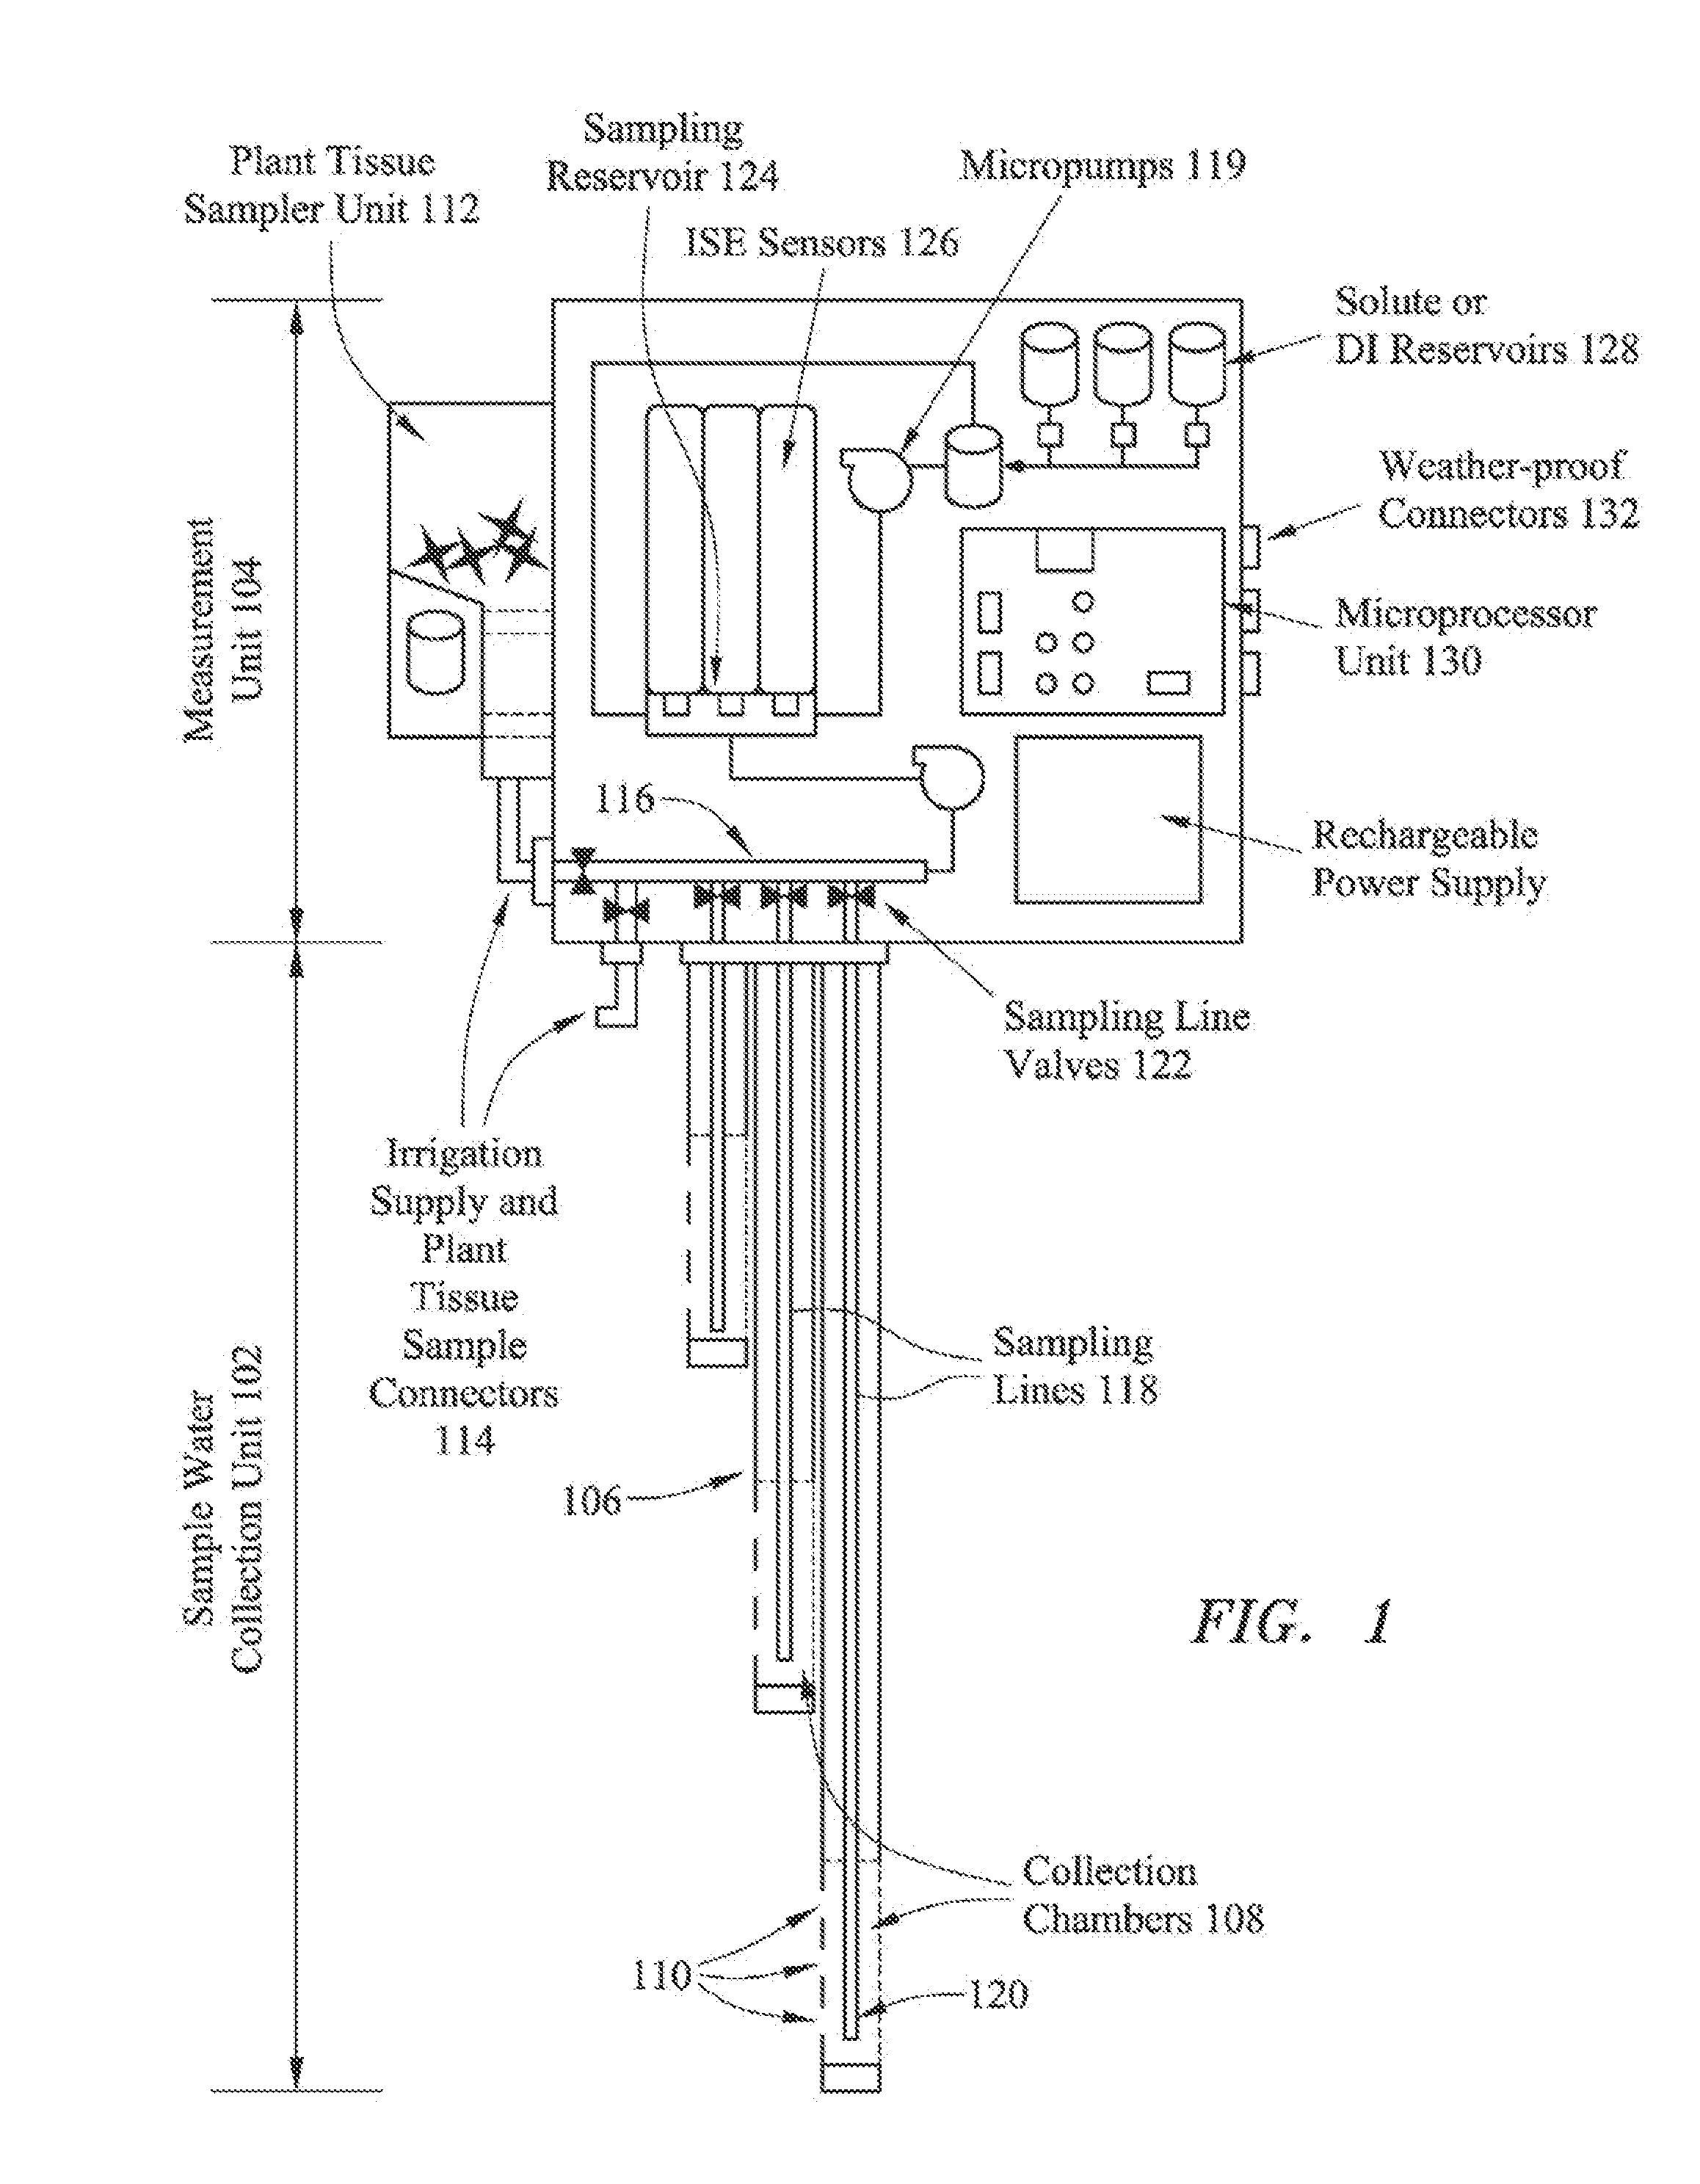 Systems, devices, and methods for environmental monitoring in agriculture